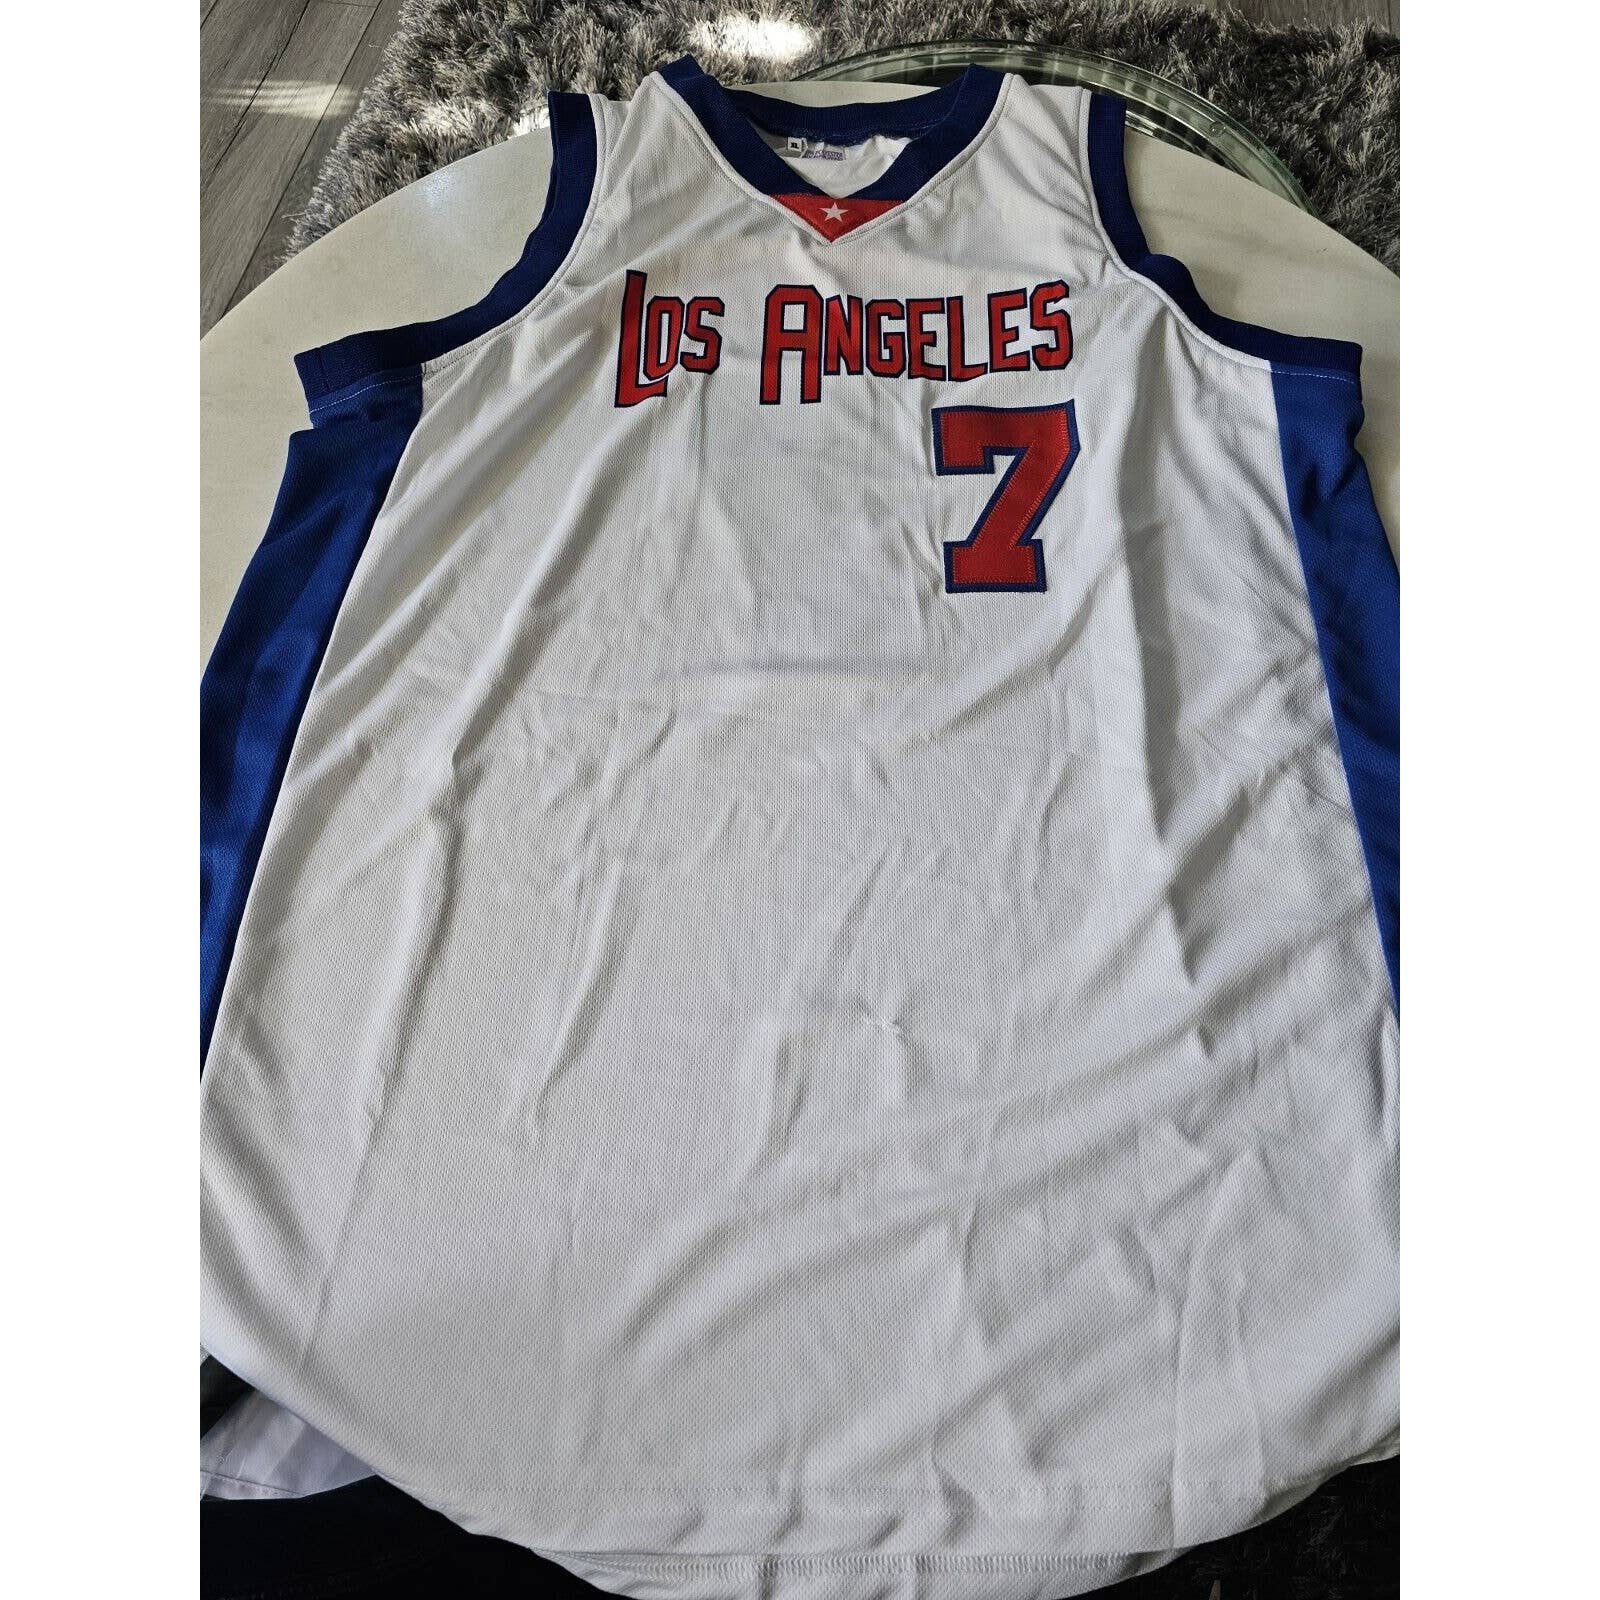 Lamar Odom Autographed/Signed Jersey JSA COA Los Angeles Clippers - TreasuresEvolved